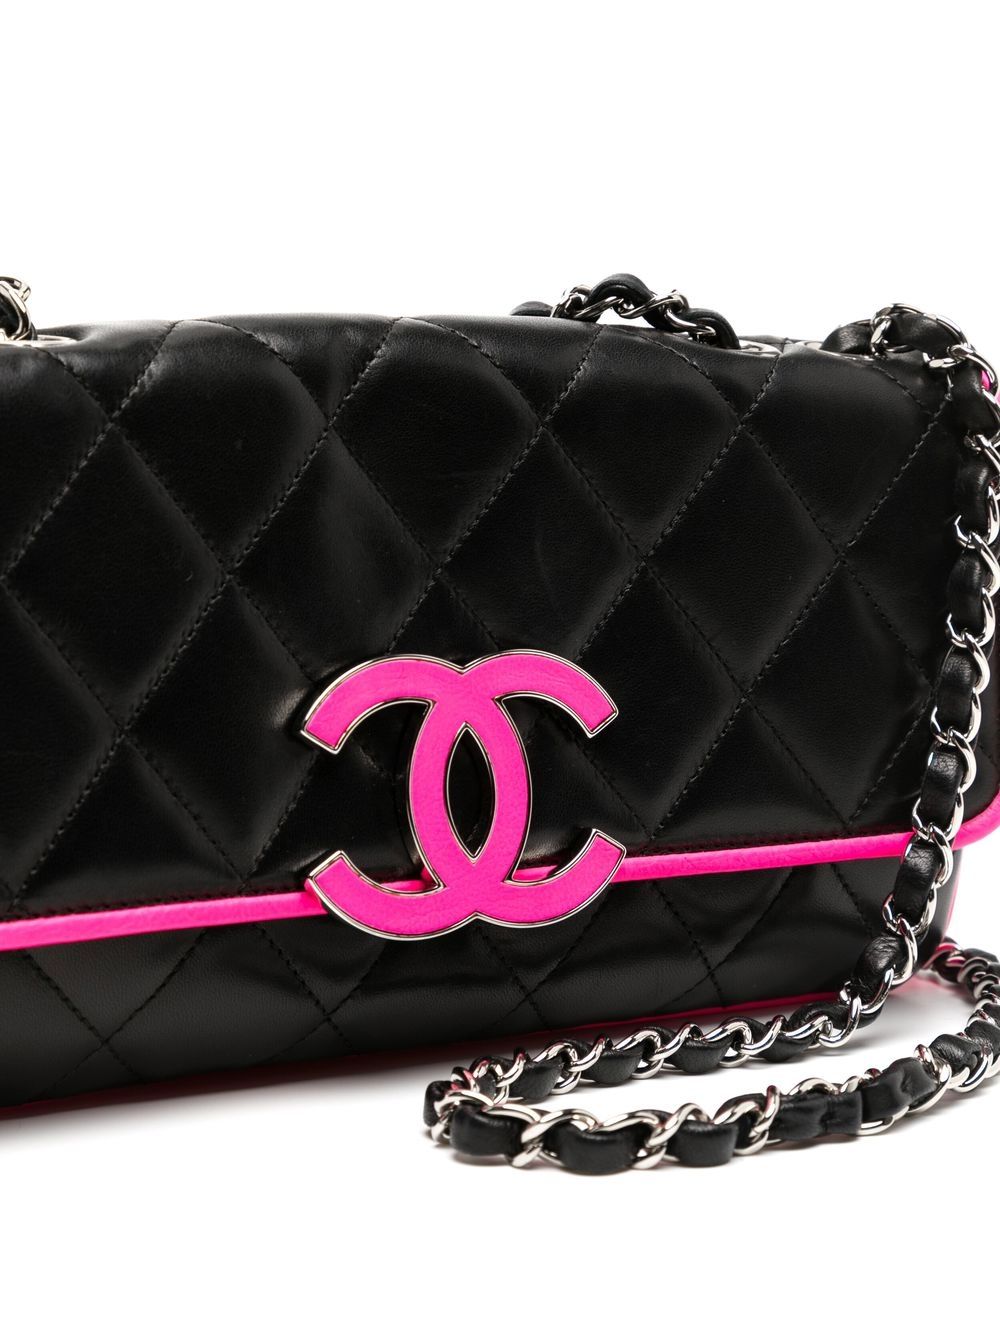 Pre-owned Chanel Cc 菱纹绗缝单肩包（2008年典藏款） In Pink